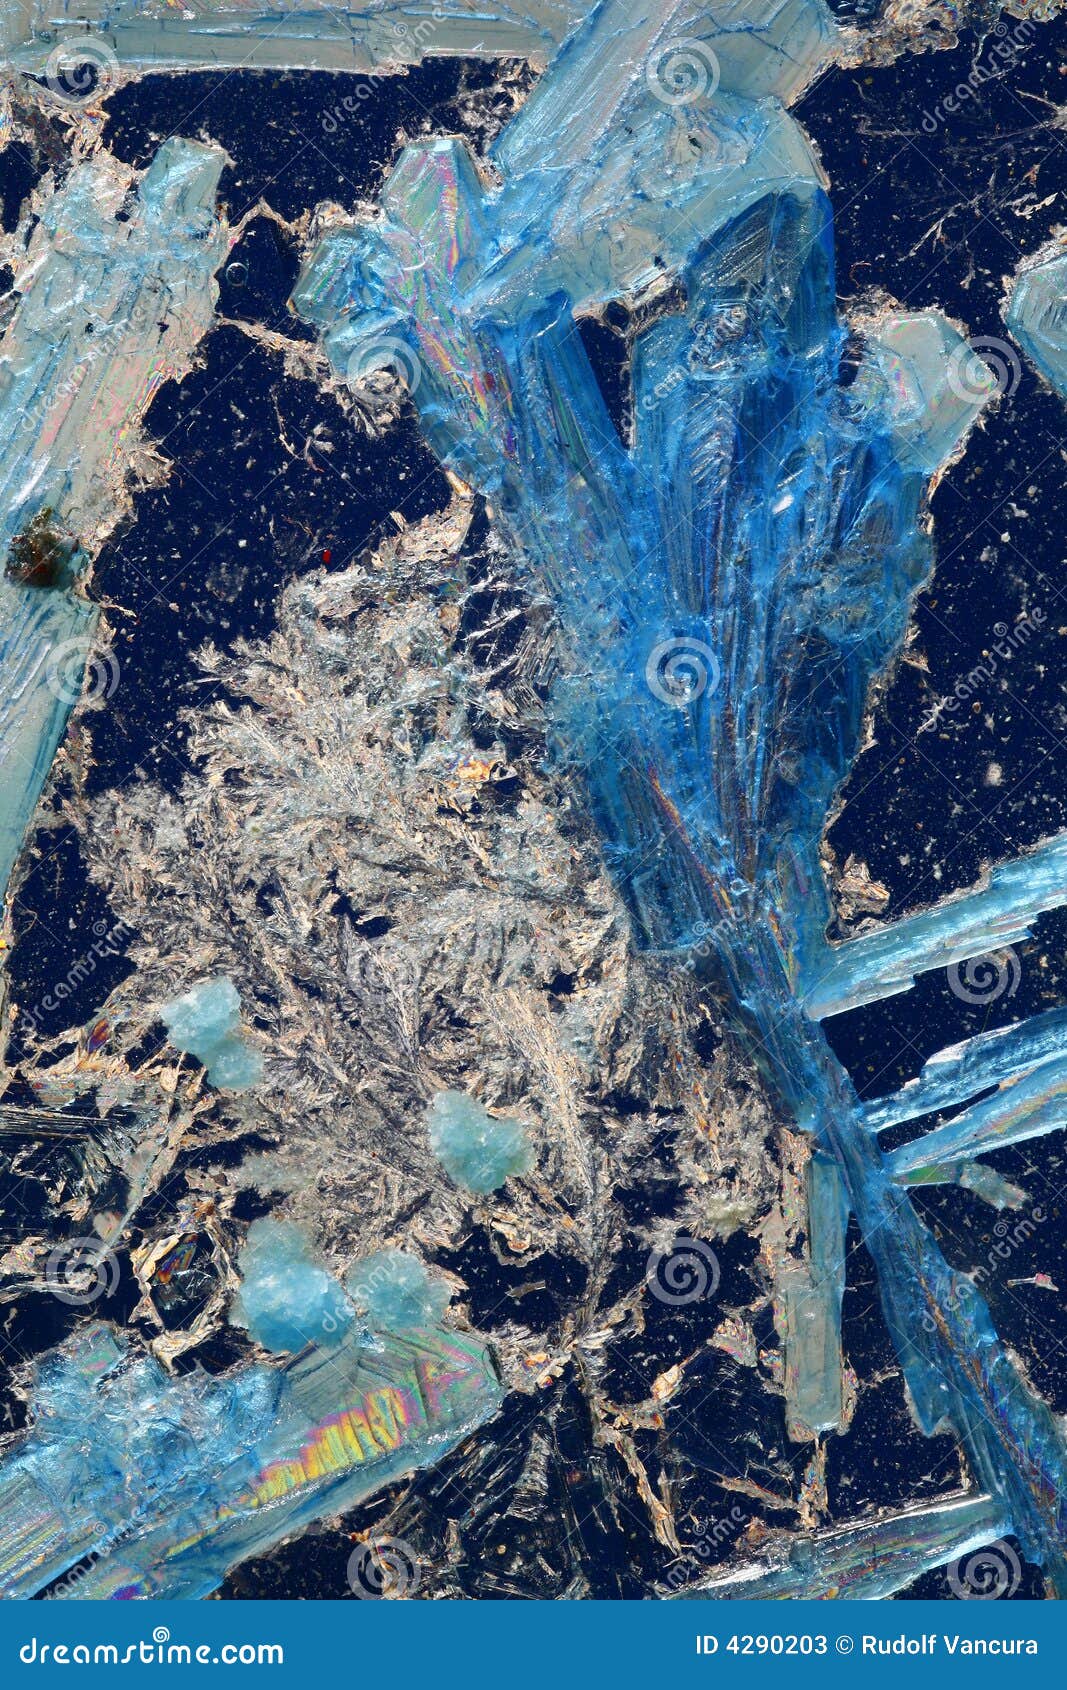 blue and white crystals